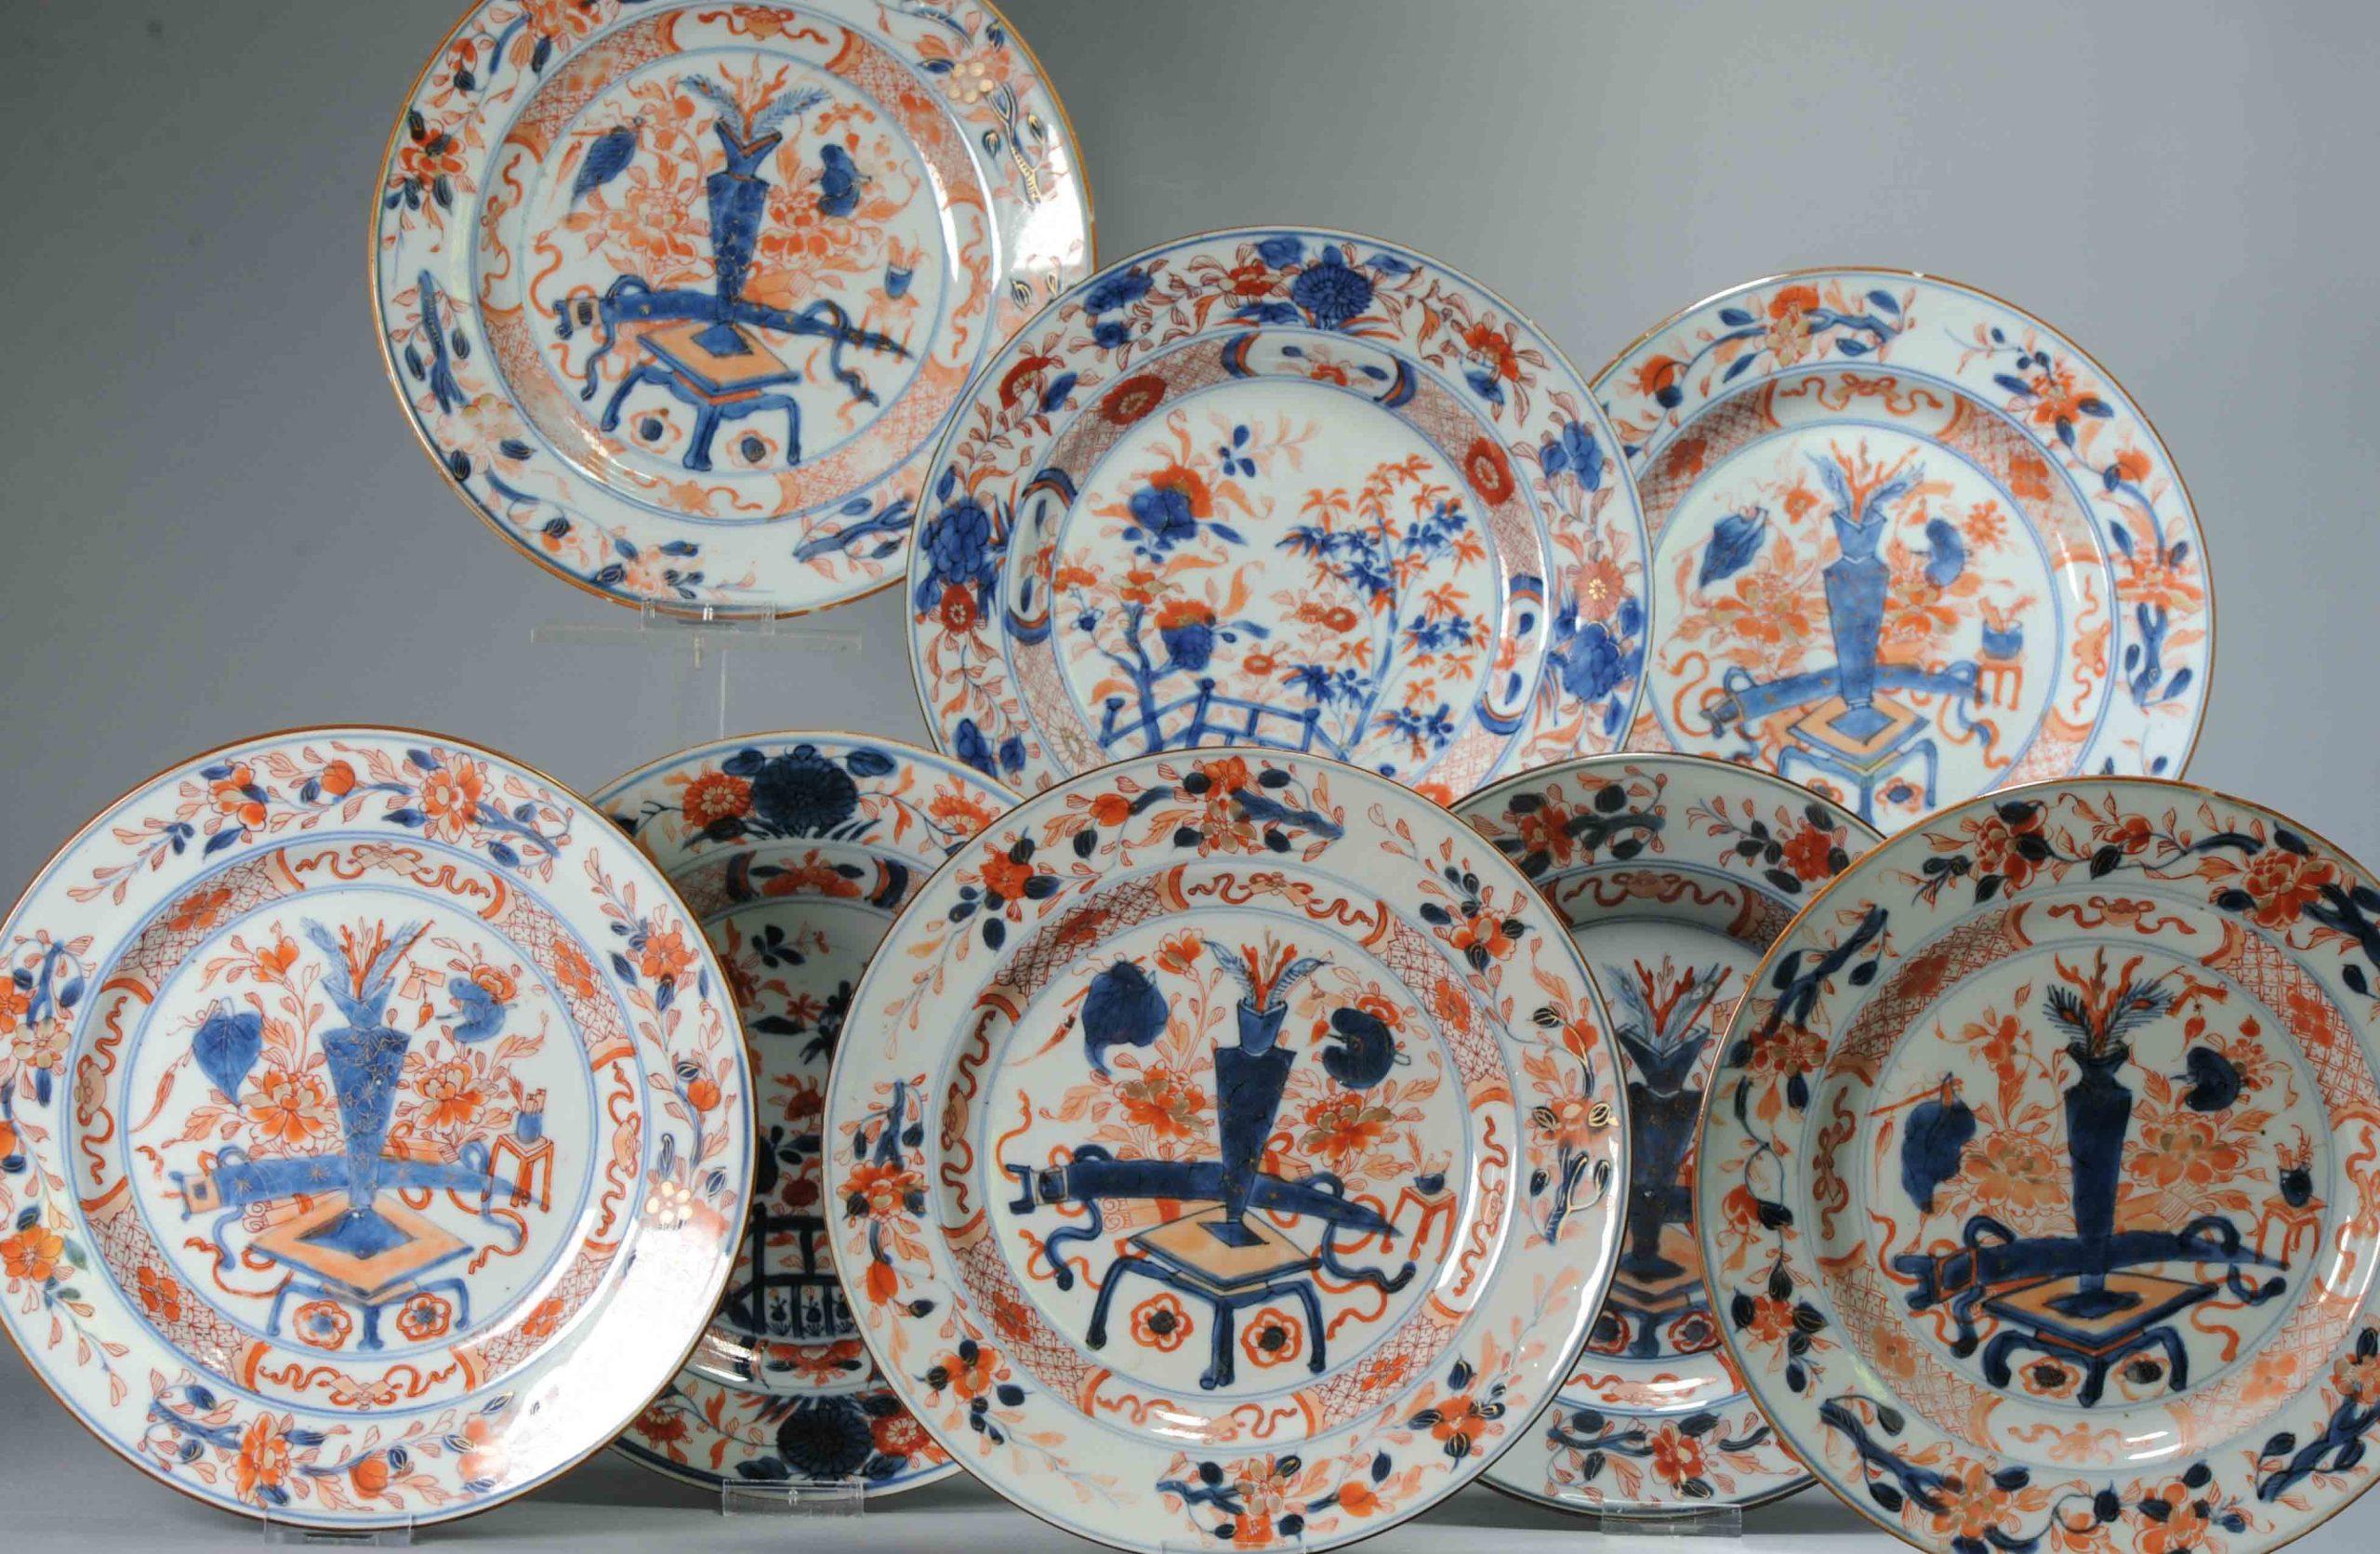 A very nicely decorated SET of 8 dishes in Imari palette with a lovely and high quality landscape scene.

Condition
1 dish with a line, 1 dish with some chips, rest of dishes with very minimal rimfrits/small chips (some only 1 small spot). Size